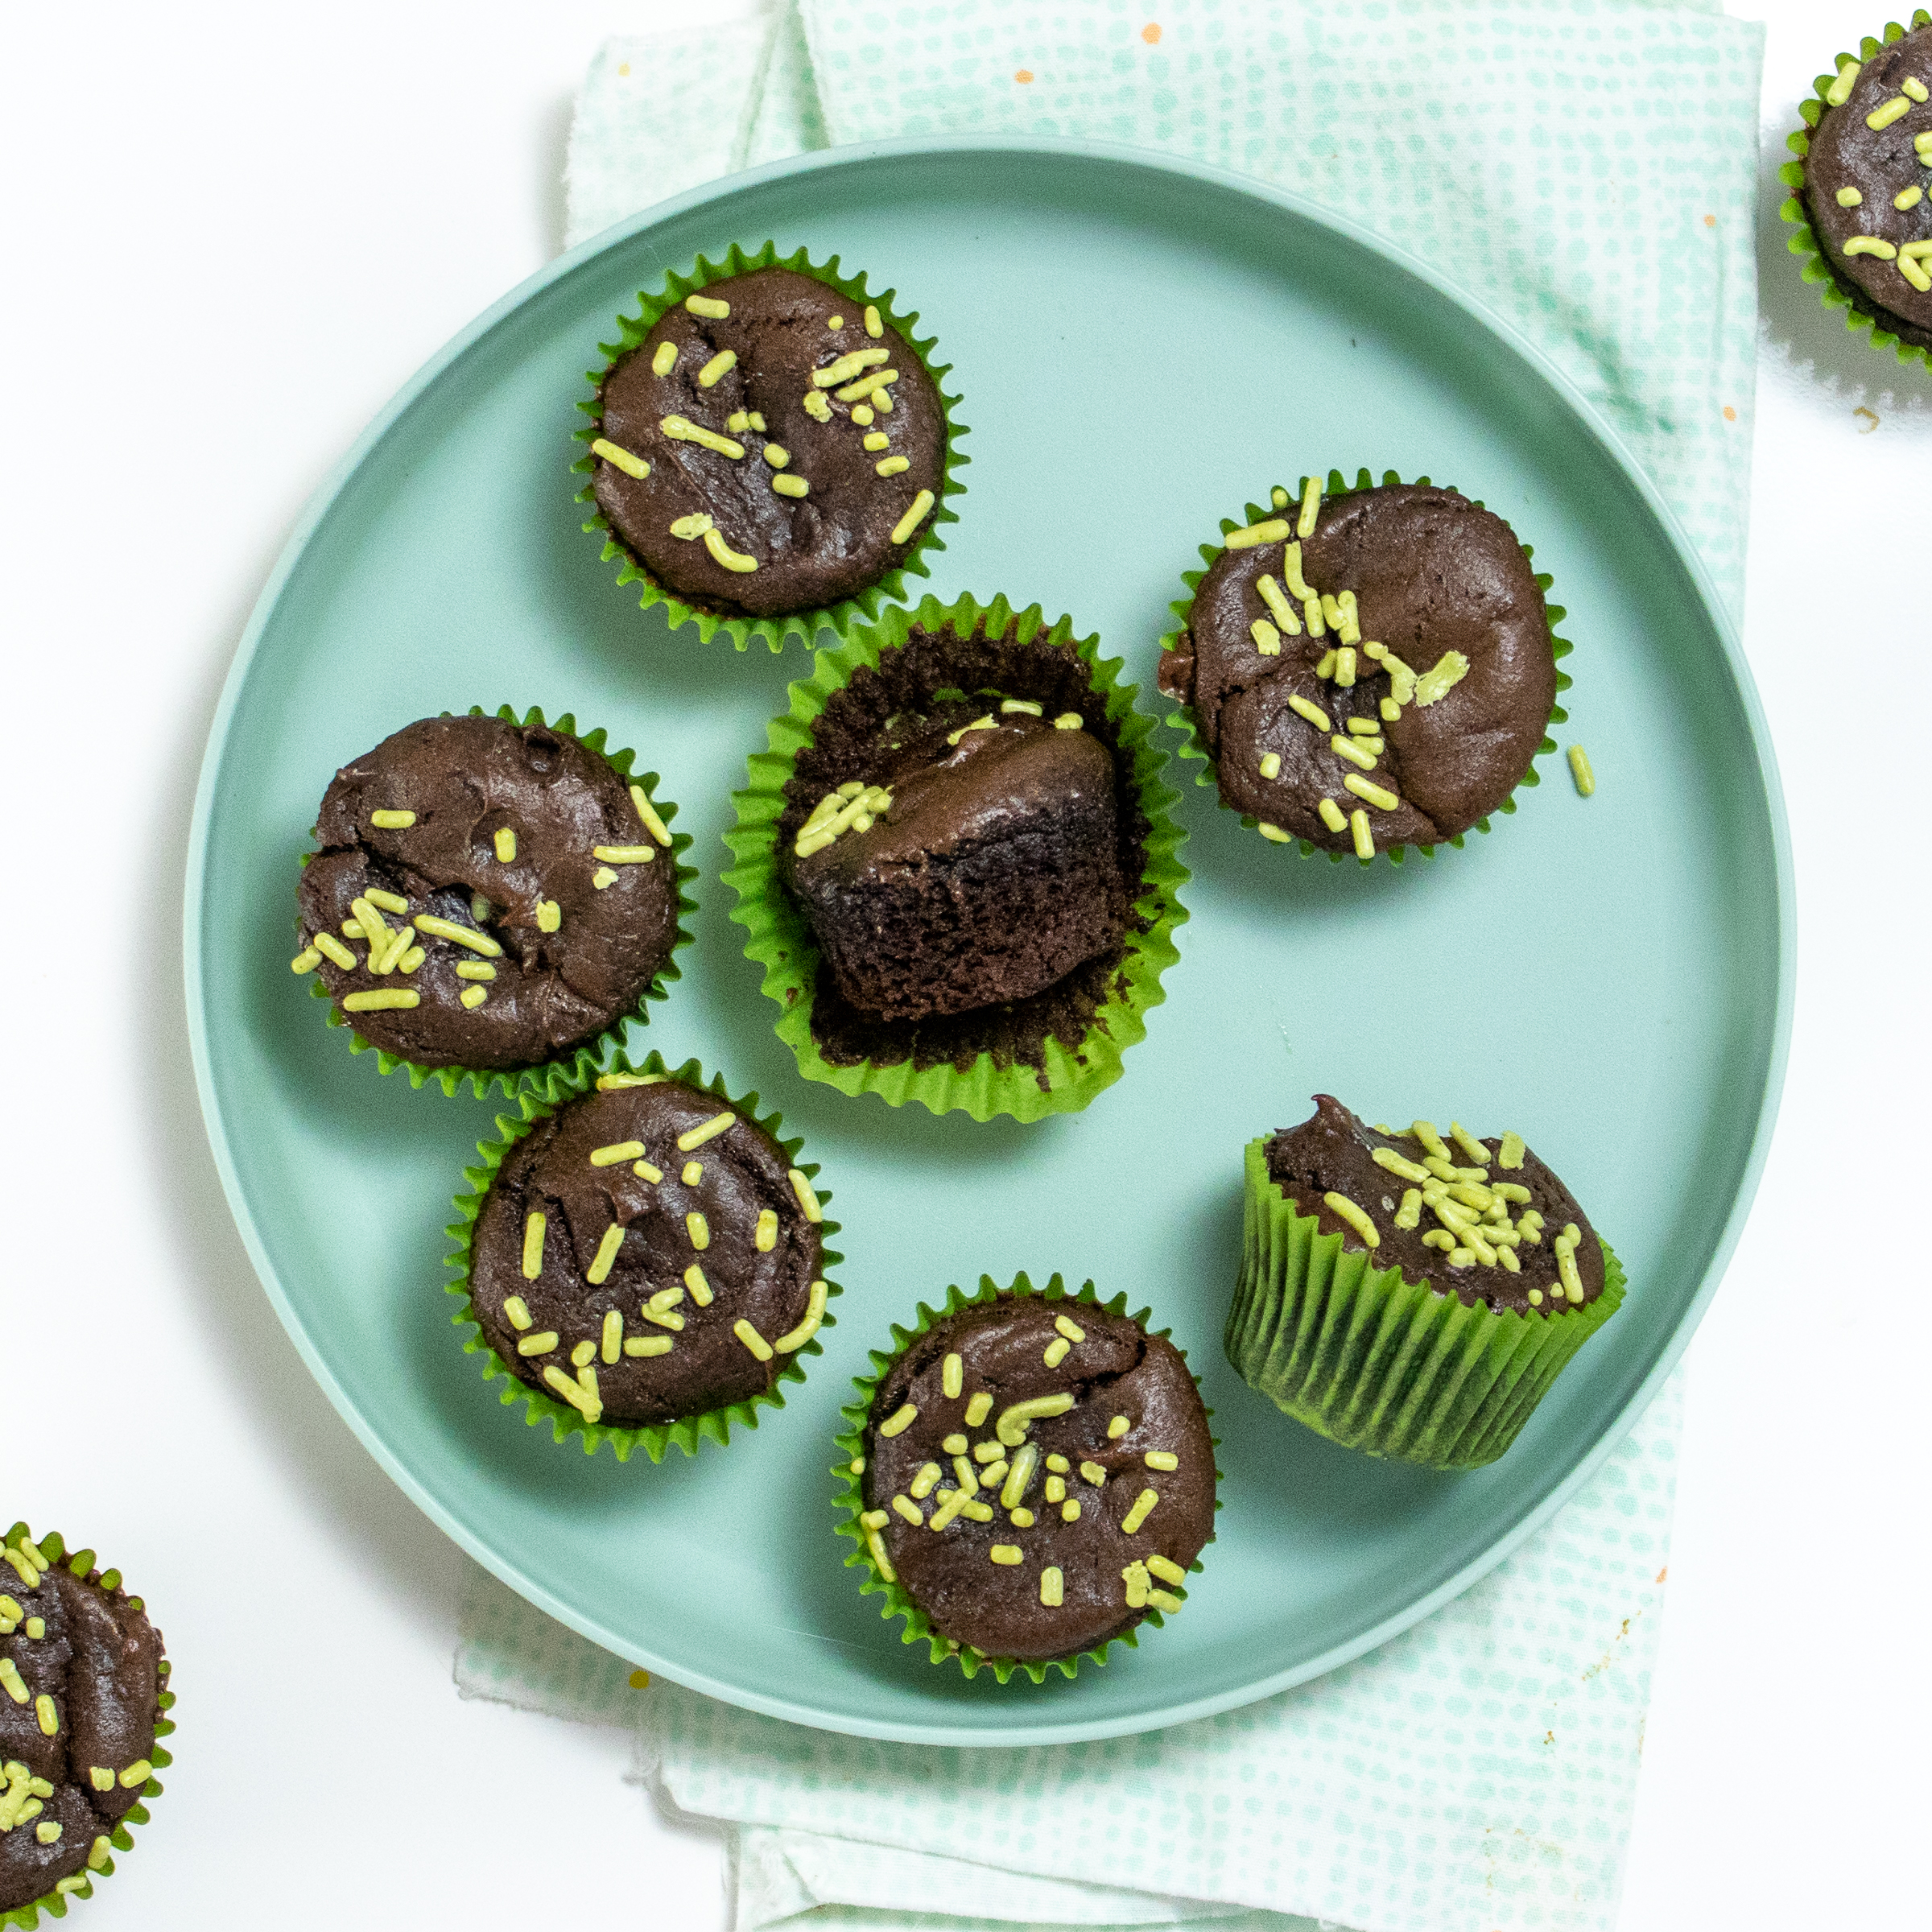 A teal plate with brownie bites with green sprinkles and a blue and green napkin.